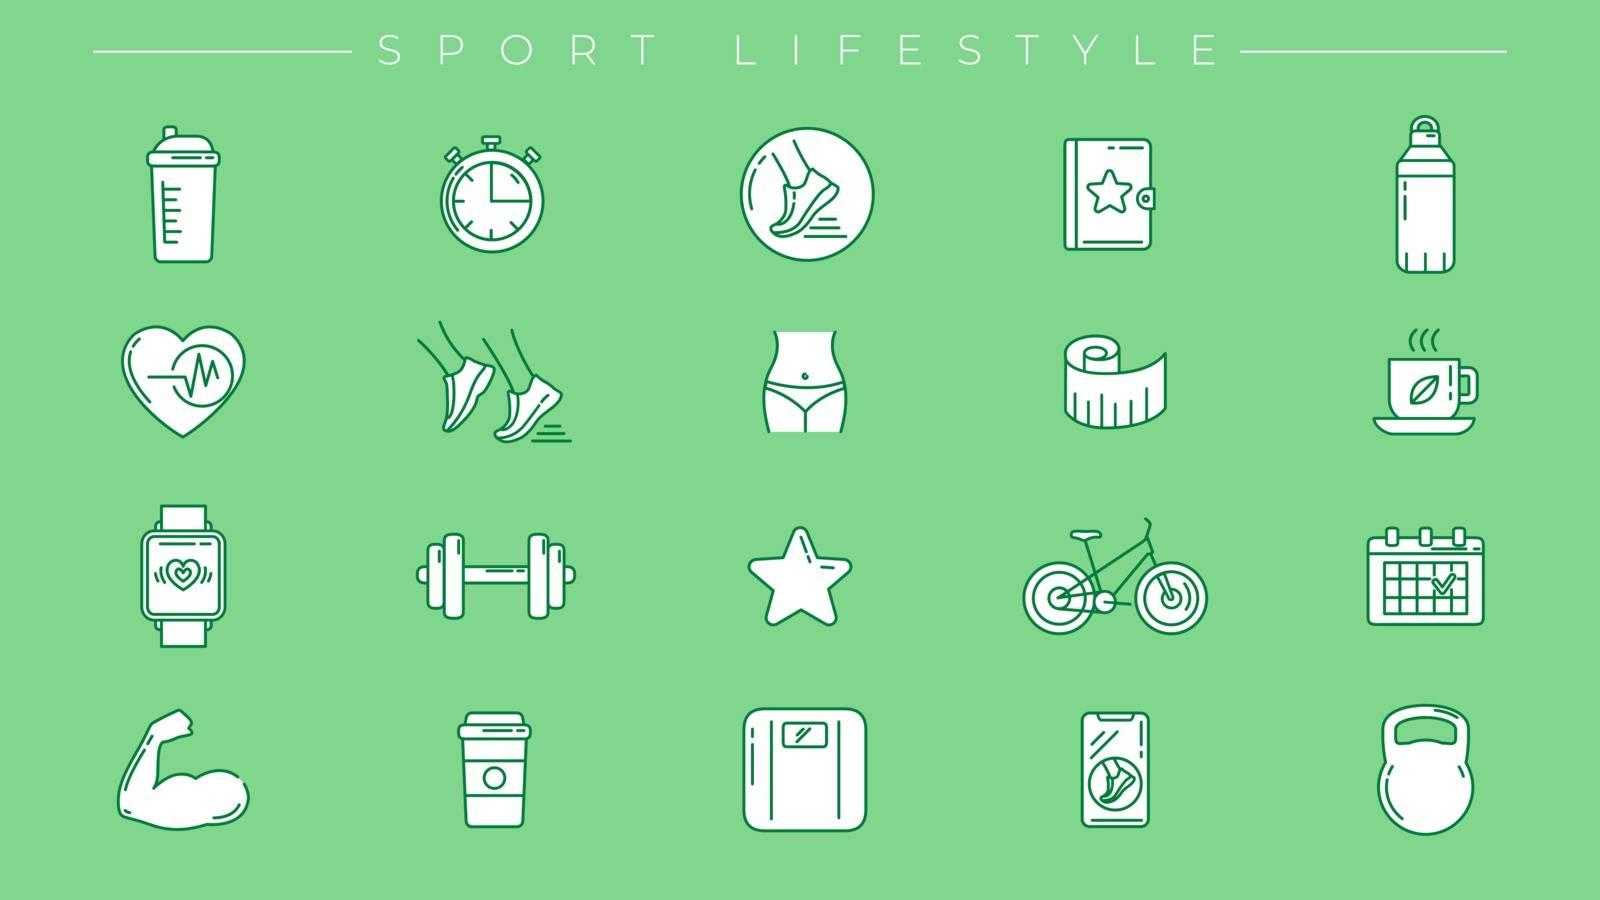 Sport Lifestyle concept line style vector icons set by ConceptCafe